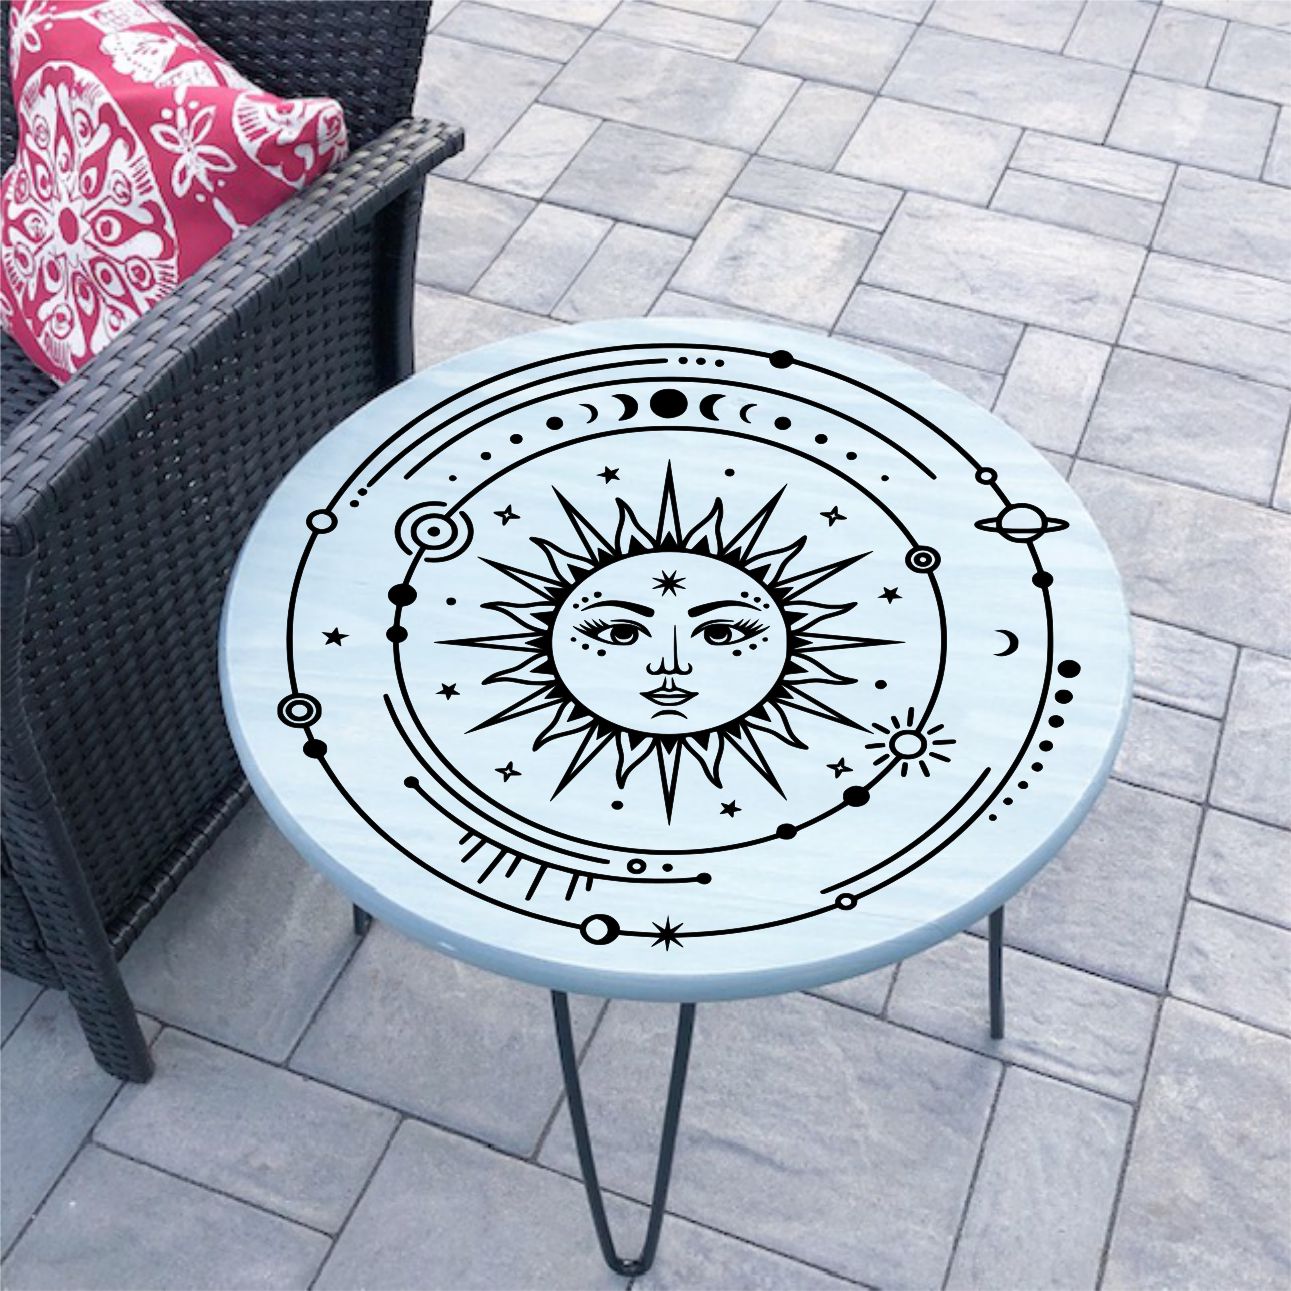 24” ROUND TABLE